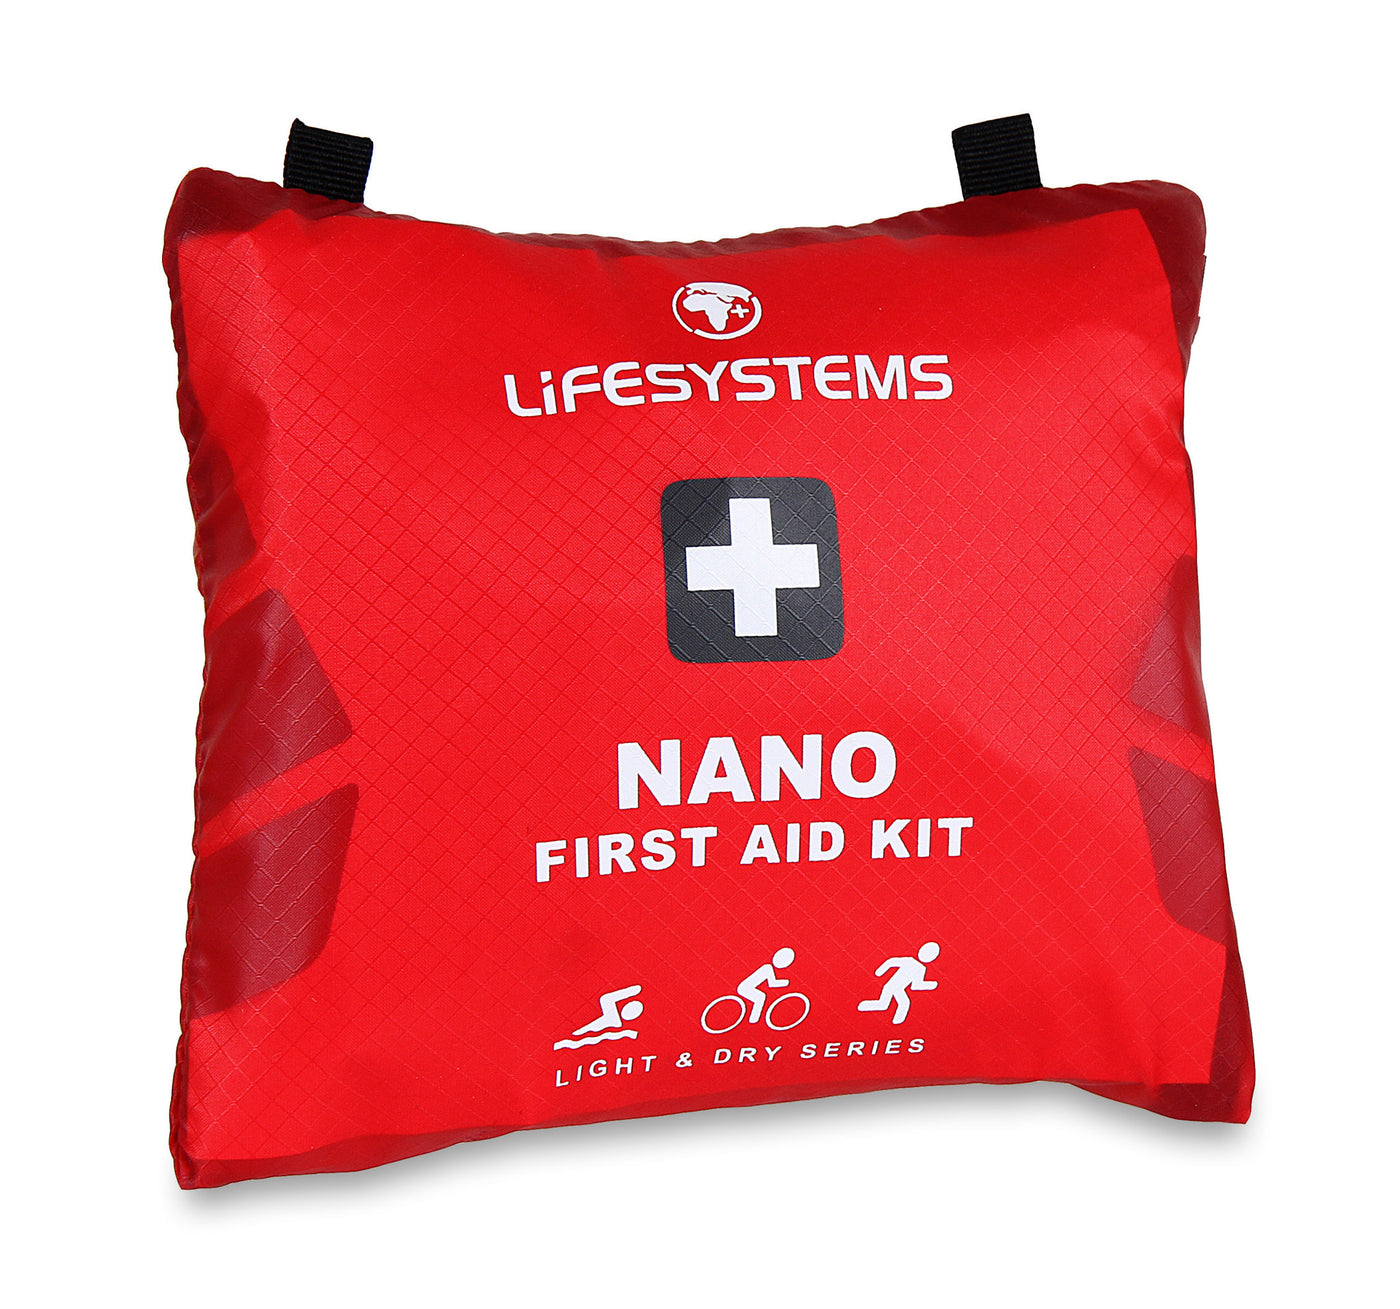 Lifesystems Light and Dry Nano First Aid Kit for adventure racing